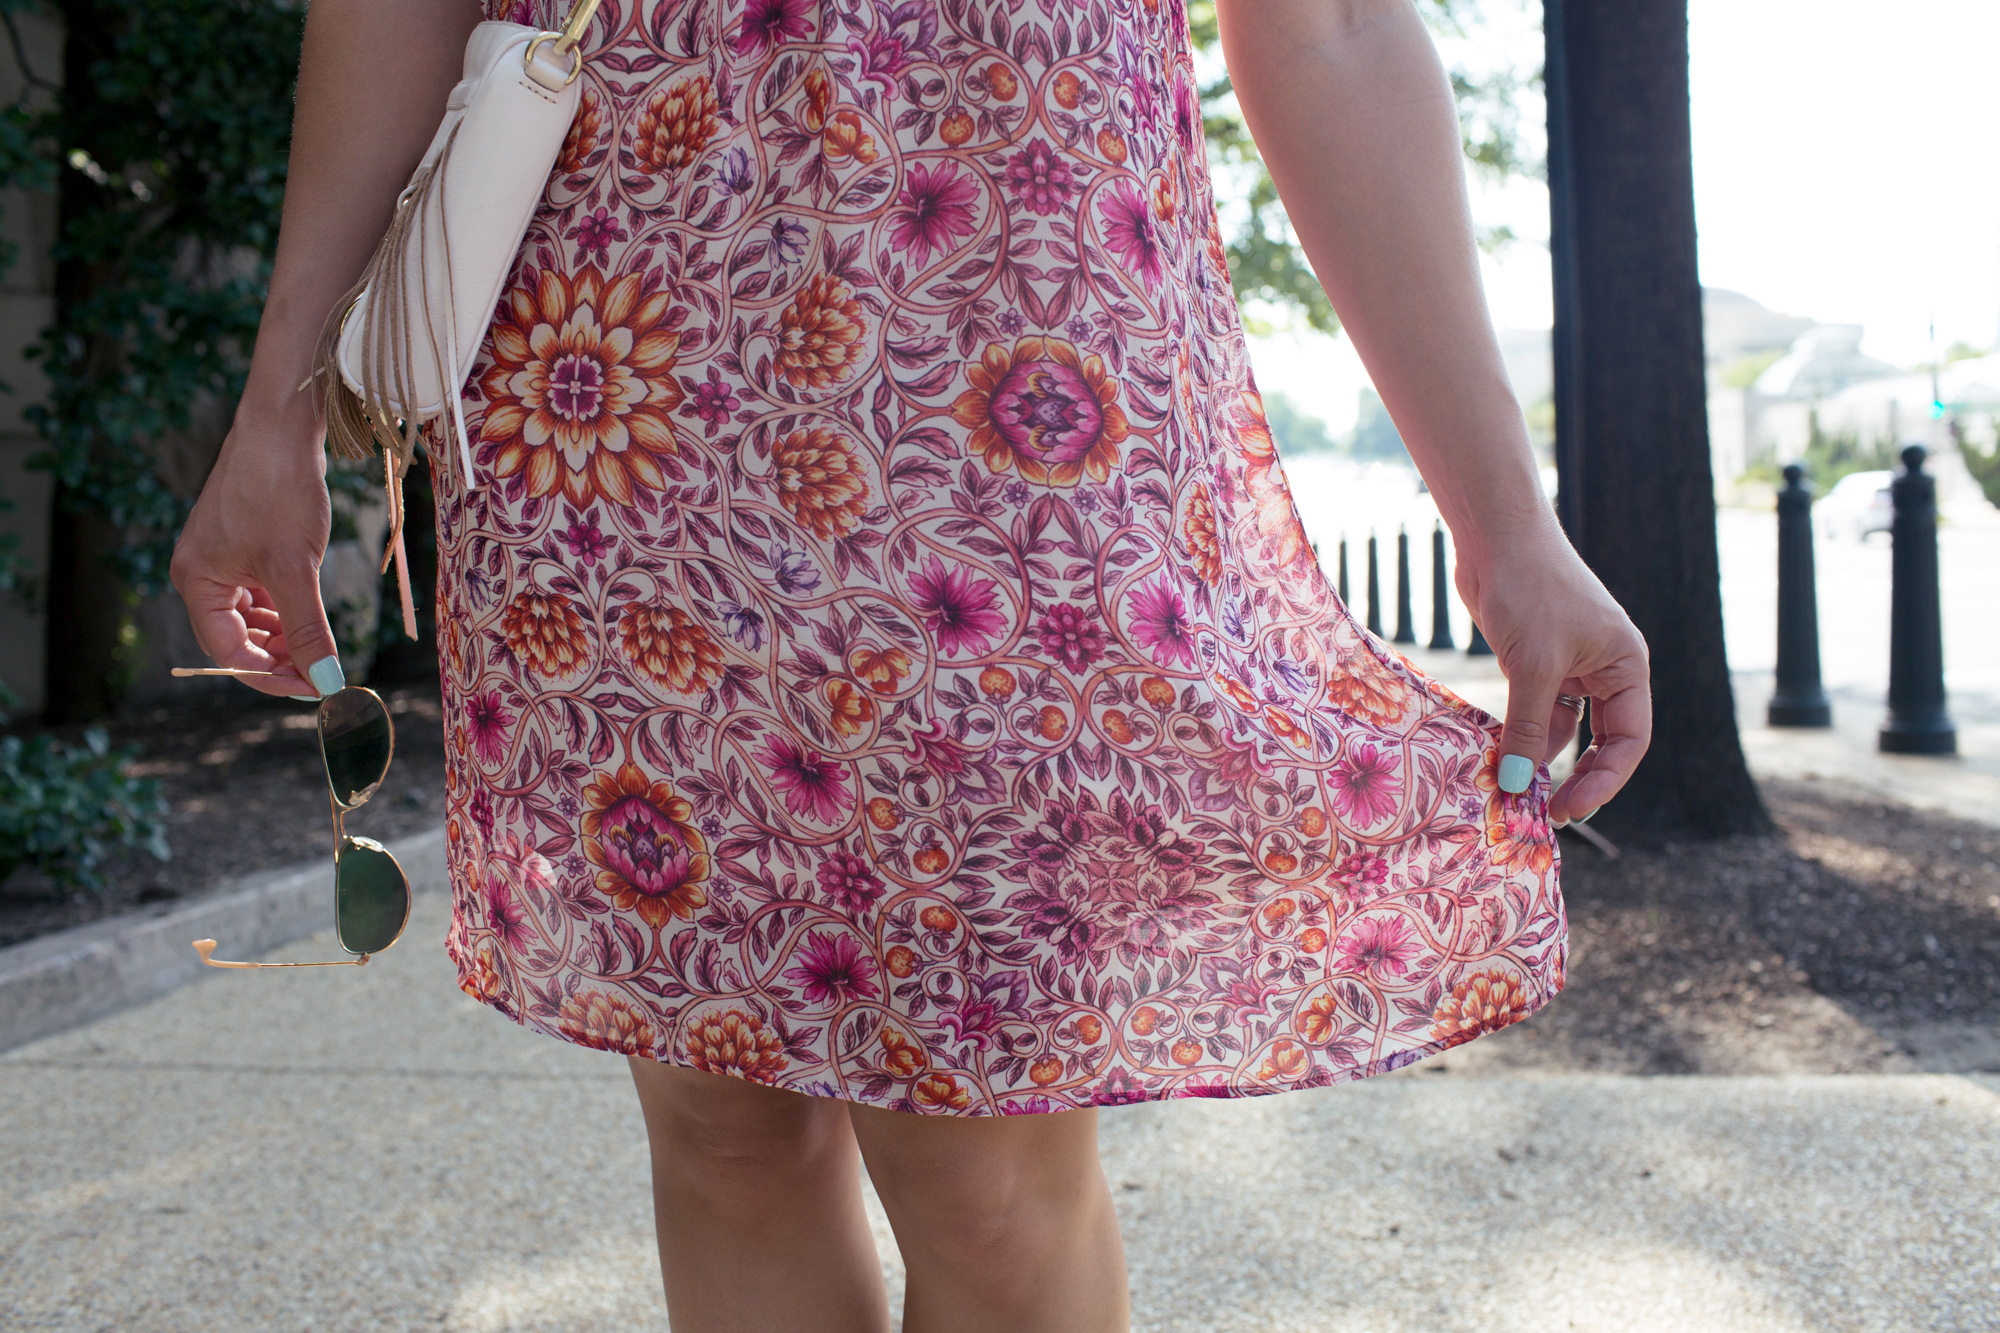 Lifestyle blogger Roxanne of Glass of Glam's lavender brown dress from Undeniable Boutique